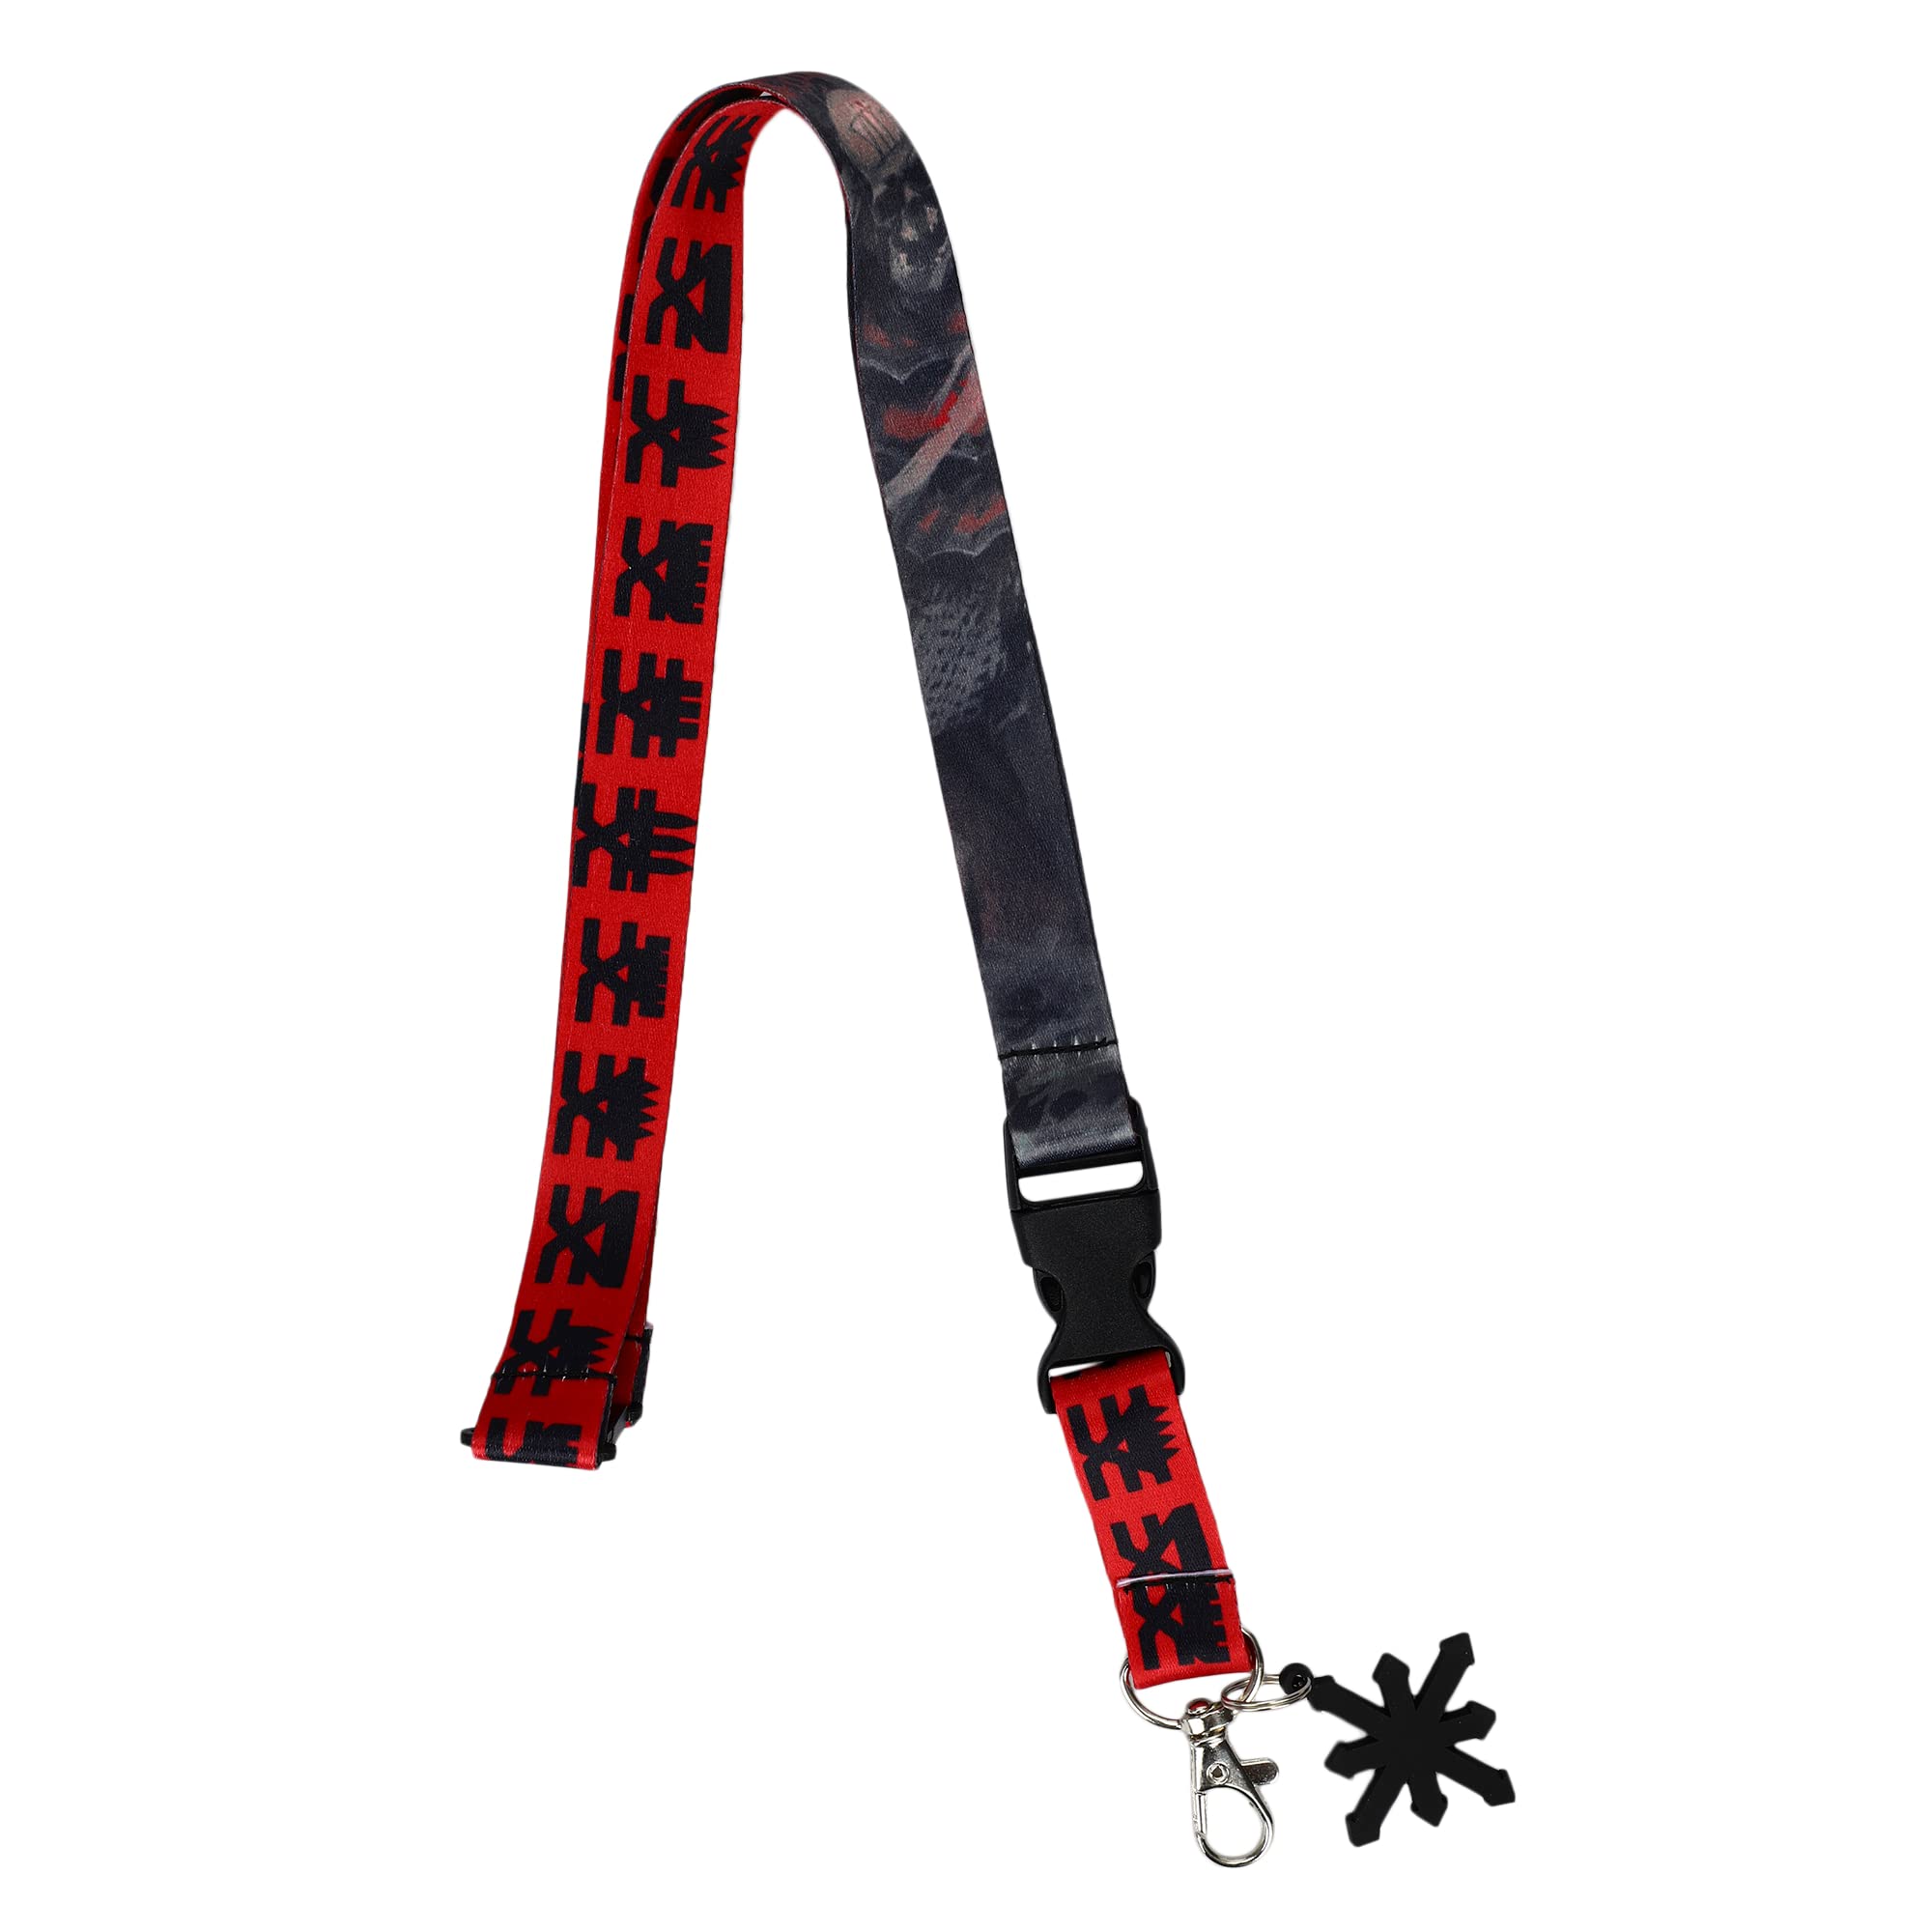 Warhammer 40,000 40K Chaos Space Marines Lanyard with Clear ID Sleeve